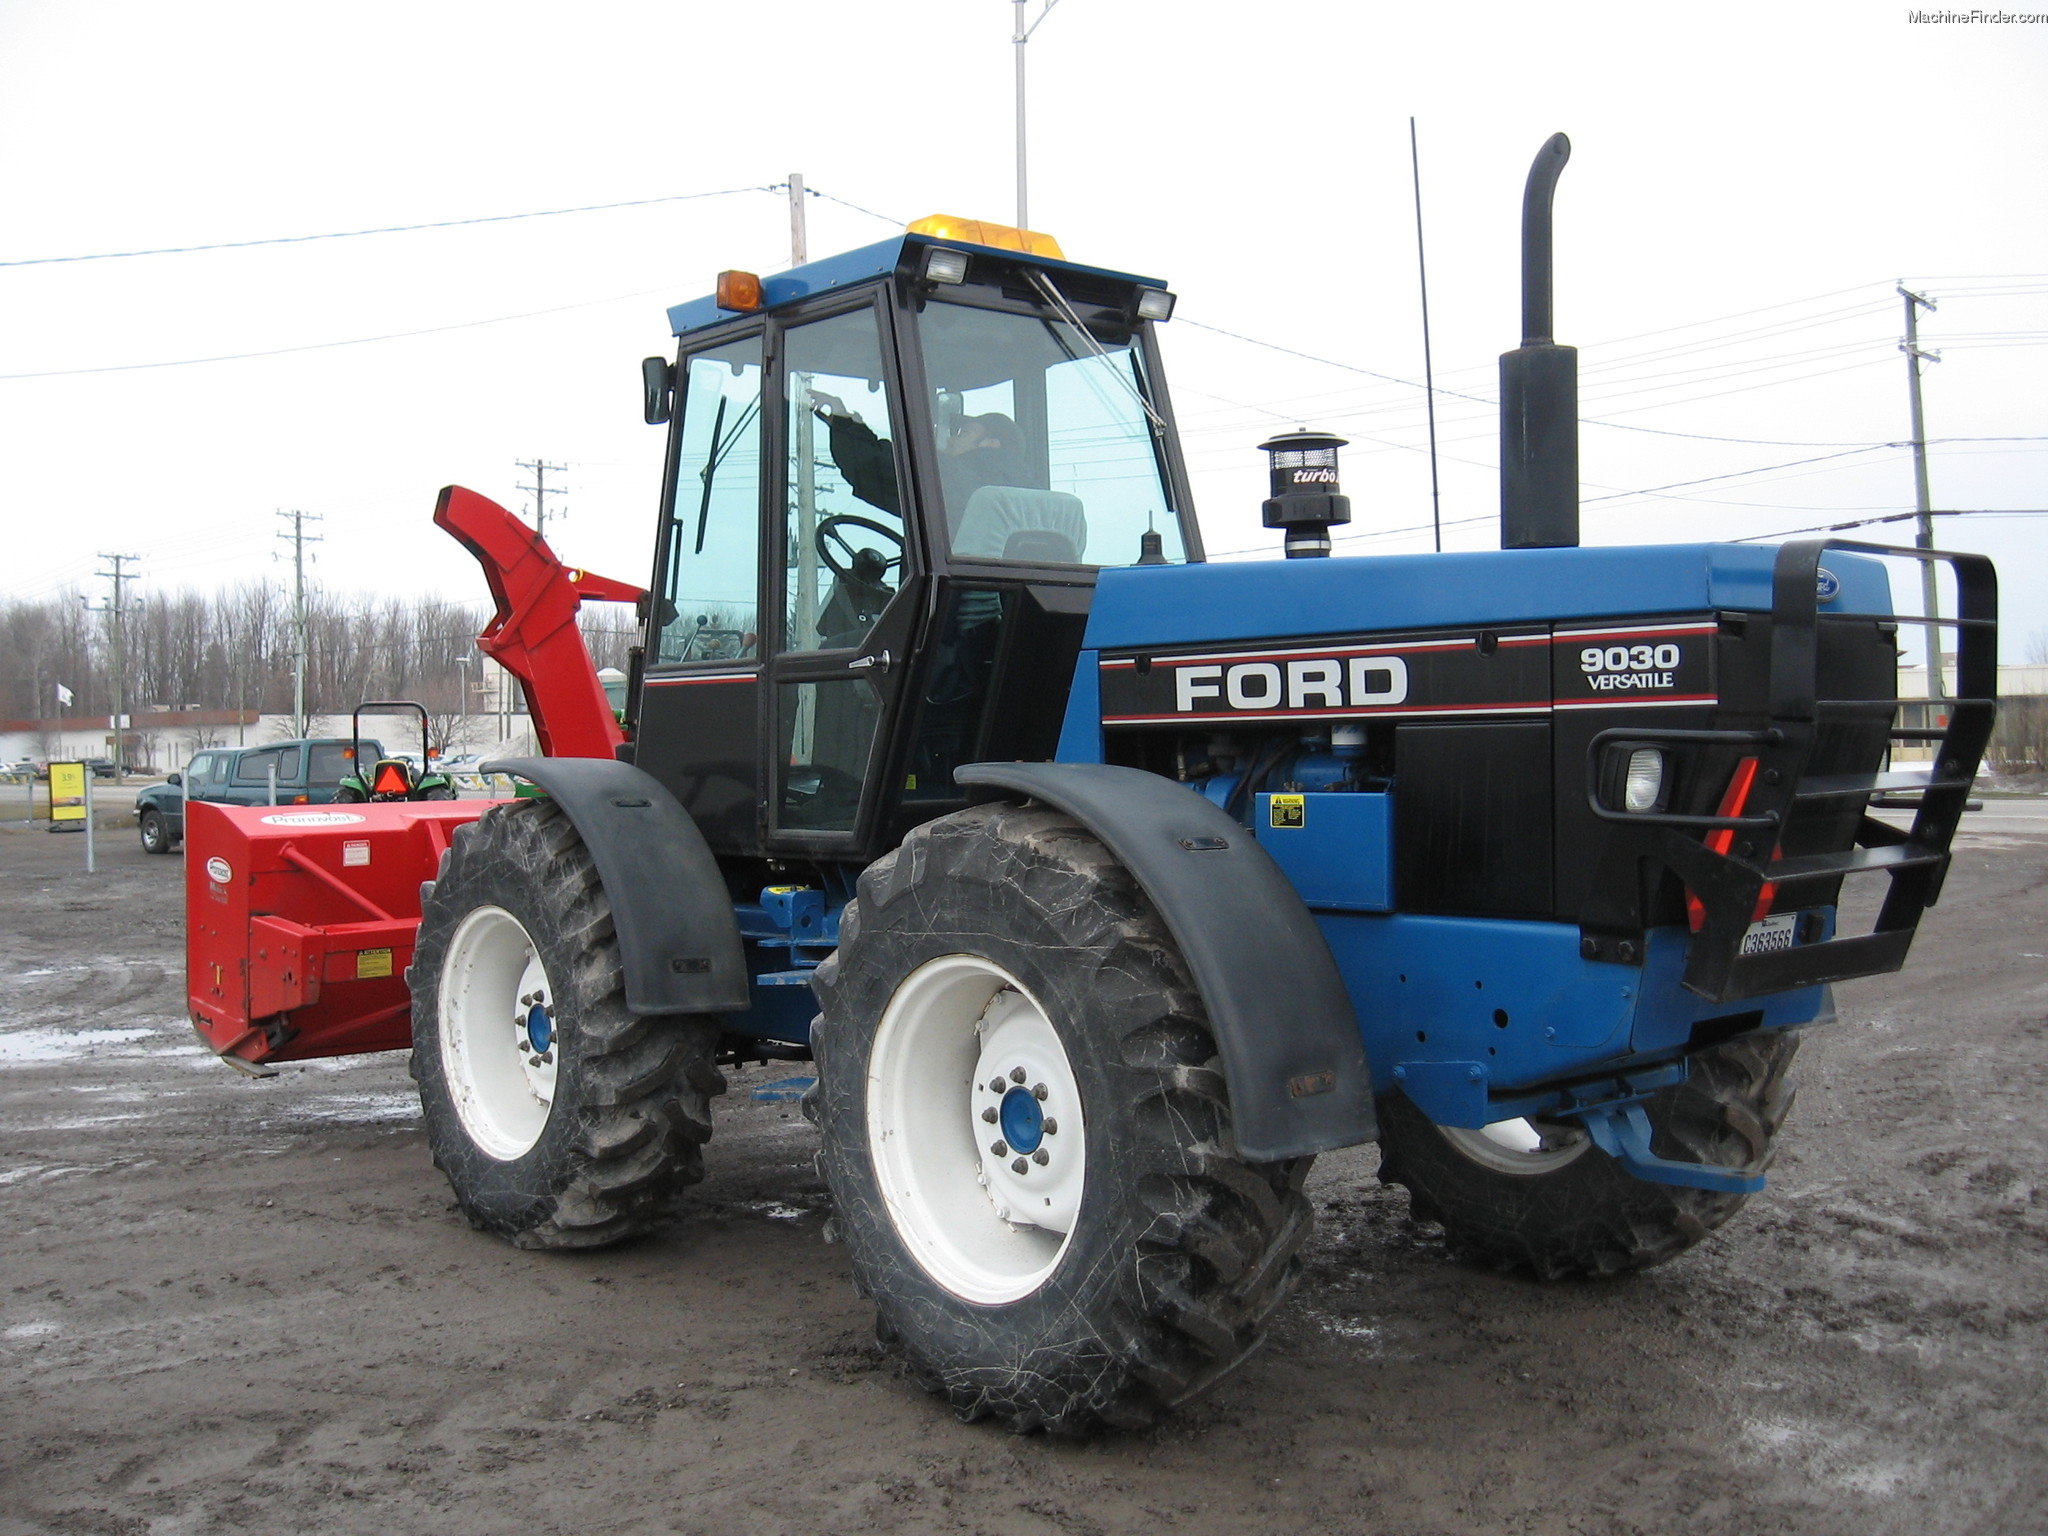 Ford new holland utility tractors #9